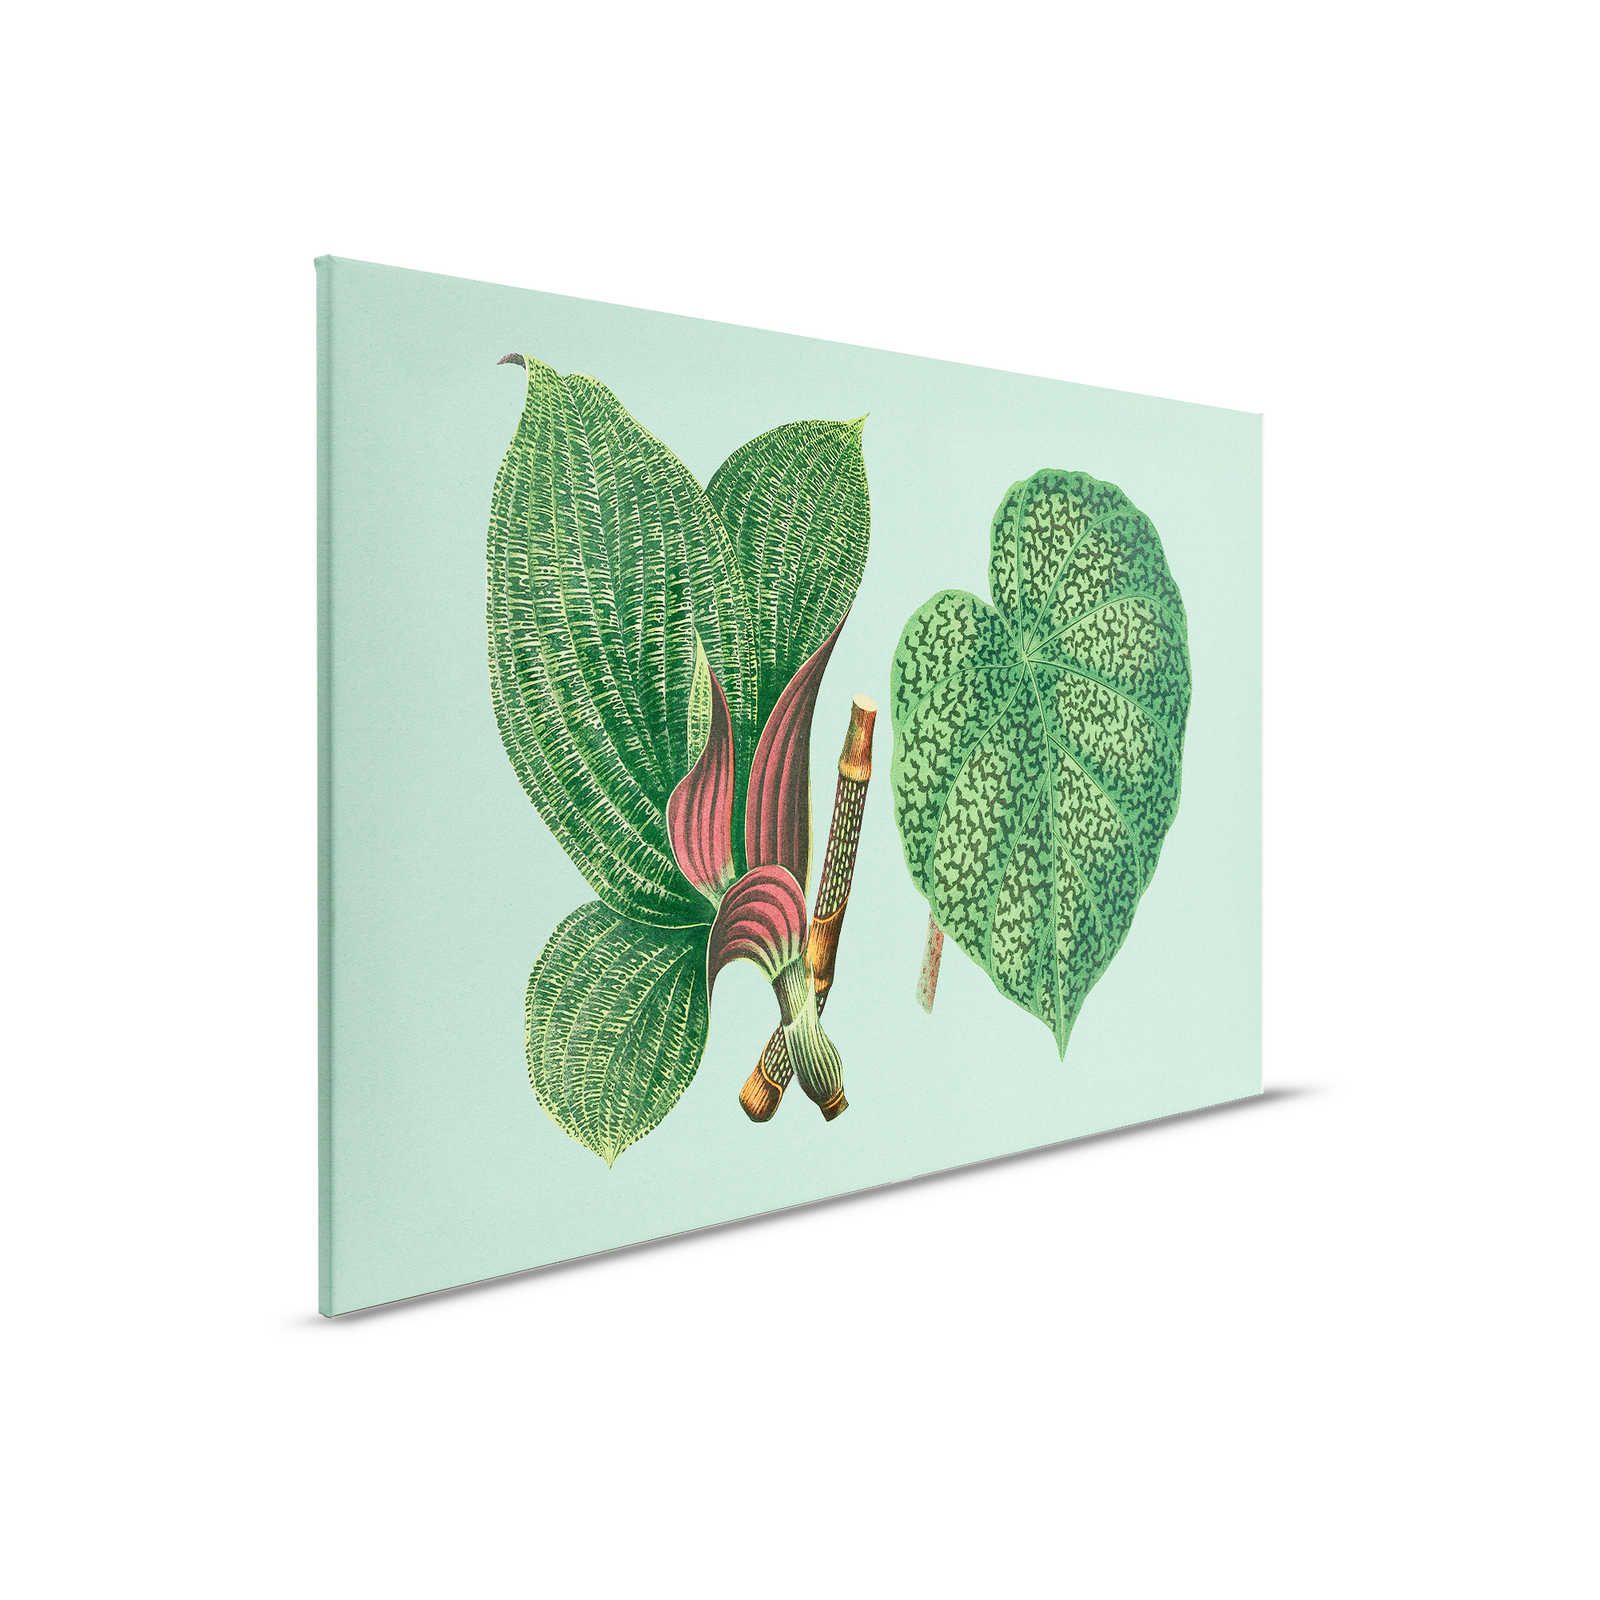 Leaf Garden 2 - Leaves Canvas painting Green with tropical plants - 0.90 m x 0.60 m
